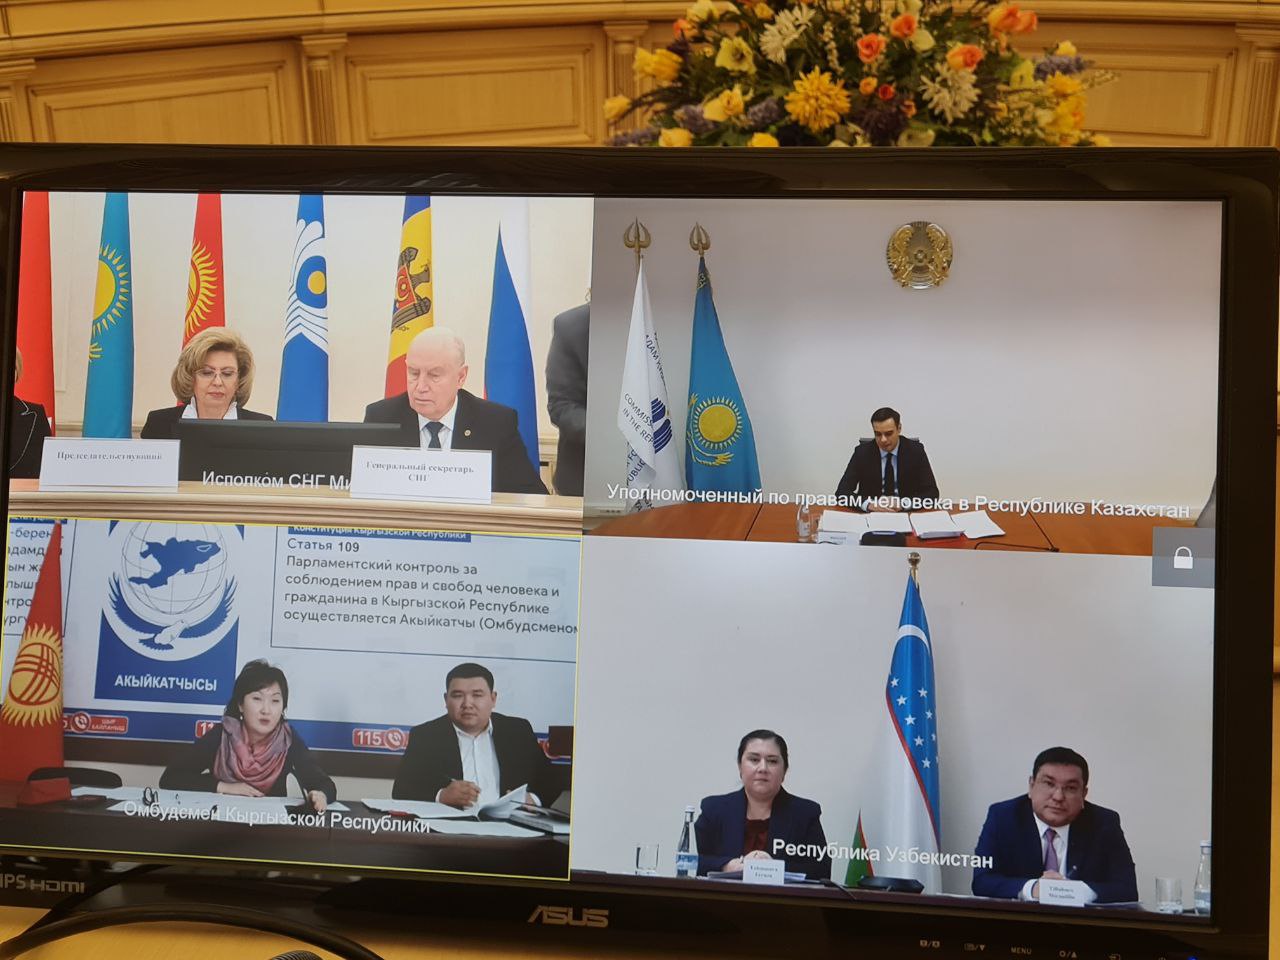 The first meeting of the CIS Human Rights Commission was held